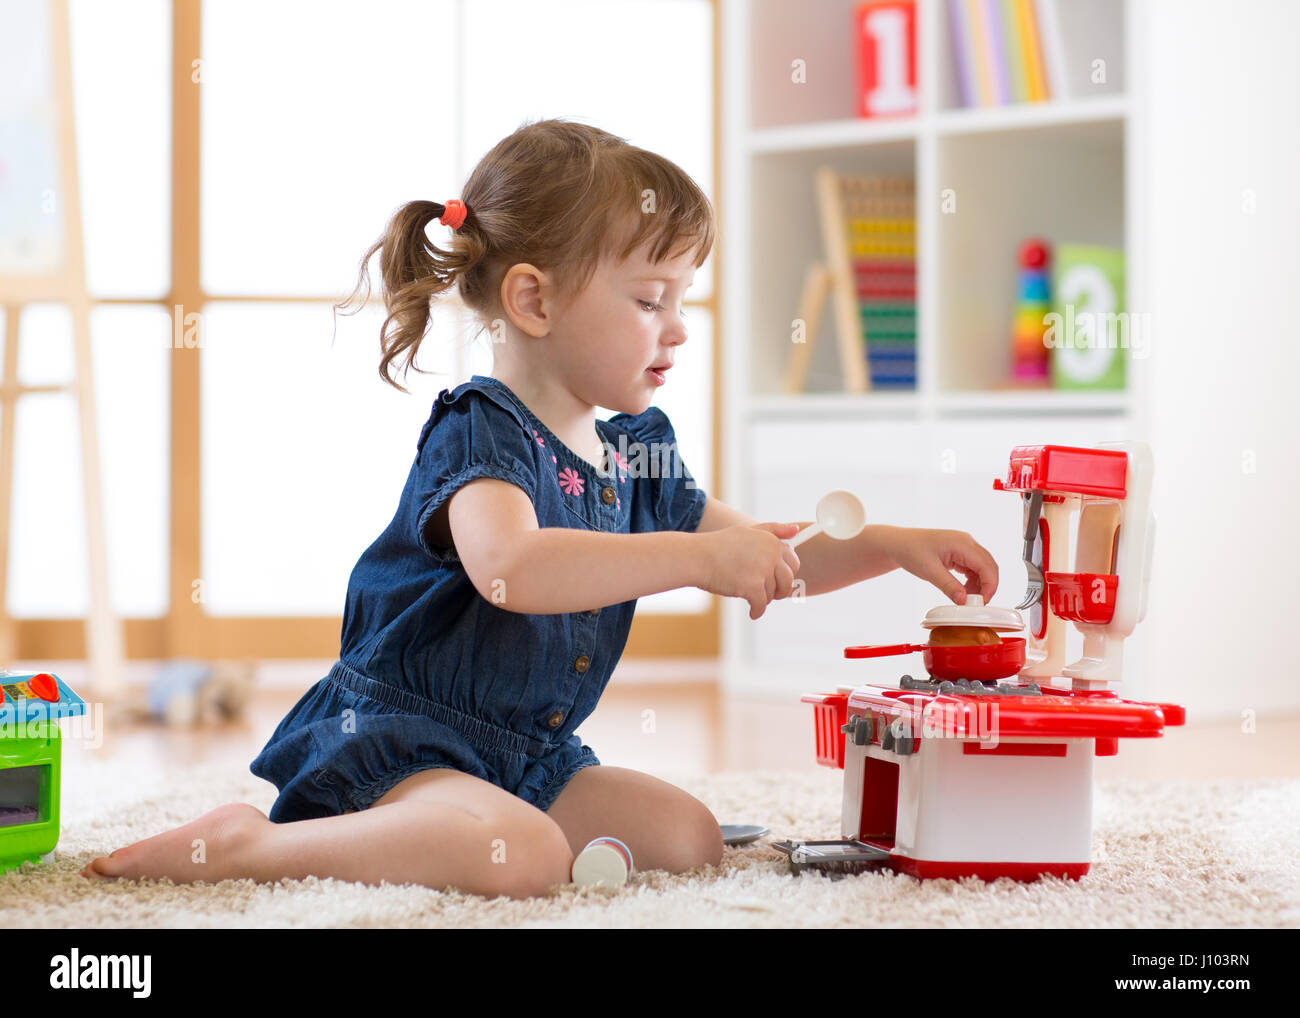 Pretty kid girl playing with a toy kitchen in children room or kindergarten Stock Photo